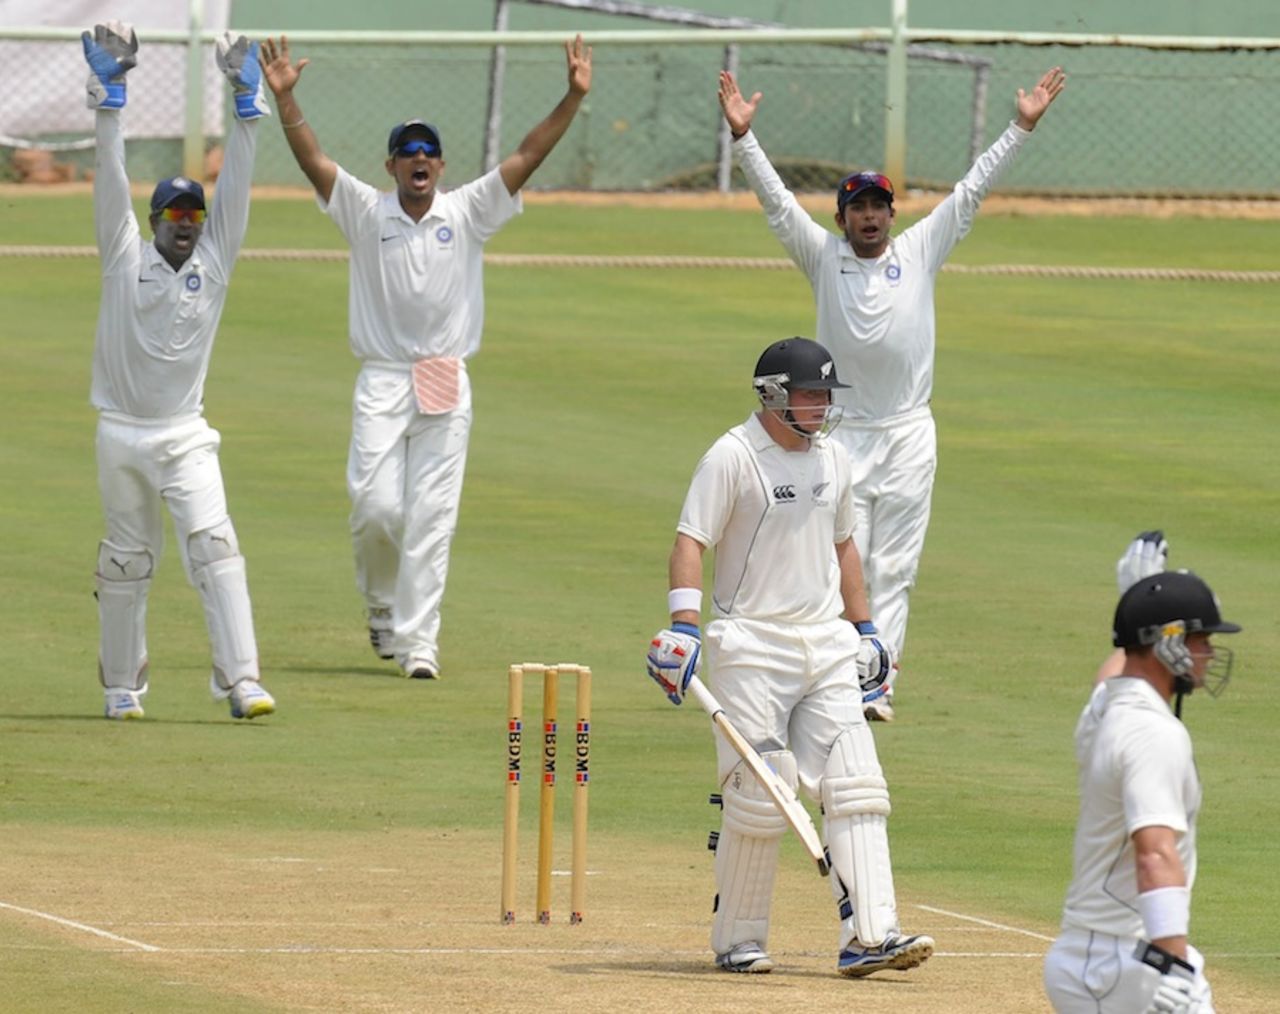 Indian players appeal for the wicket of Tom Latham, India A v New Zealand A, 2nd unofficial Test, Visakhapatnam, Sep 2, 2013